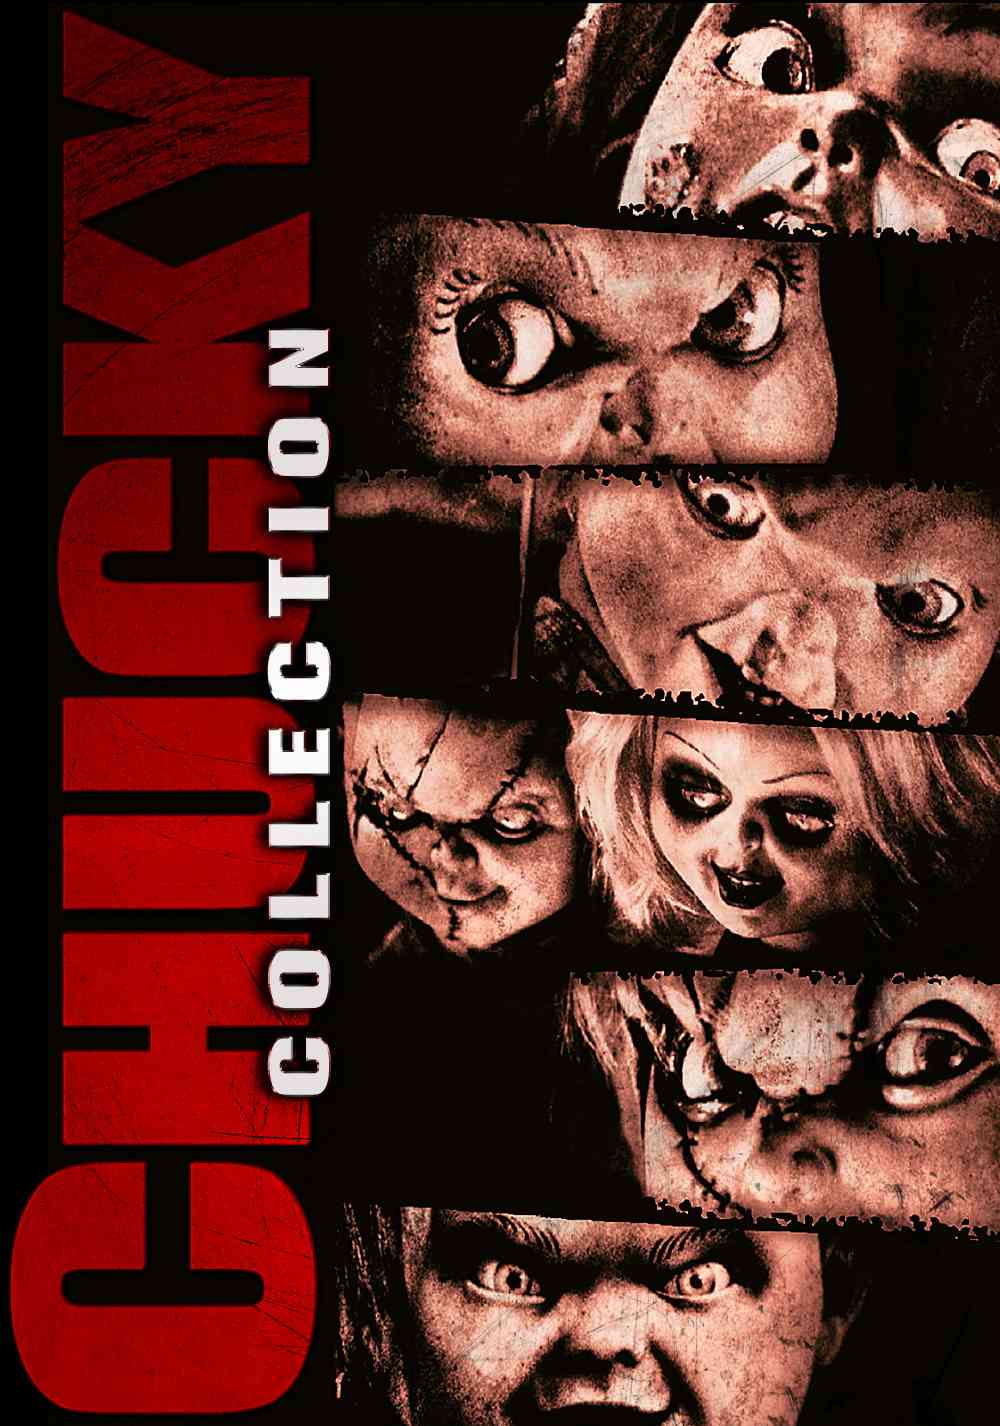 FULL COLLECTION: Child’s Play [1988 – 2019]